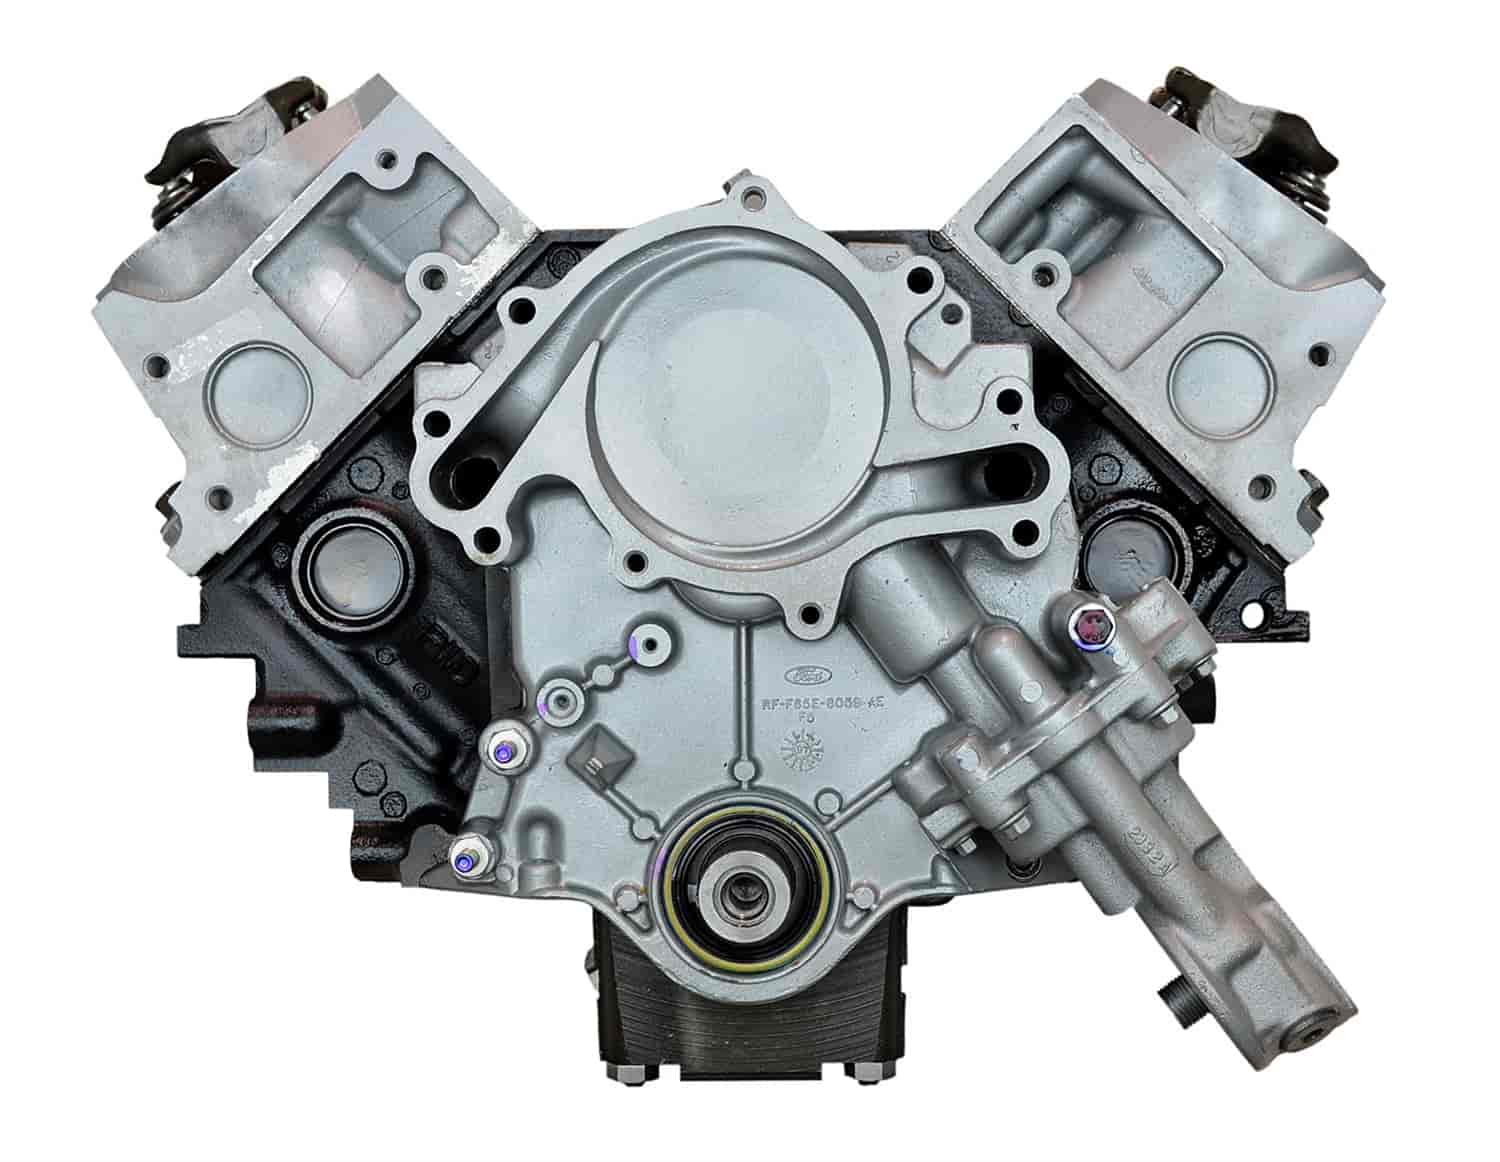 Remanufactured Crate Engine for 1996 Ford Windstar with